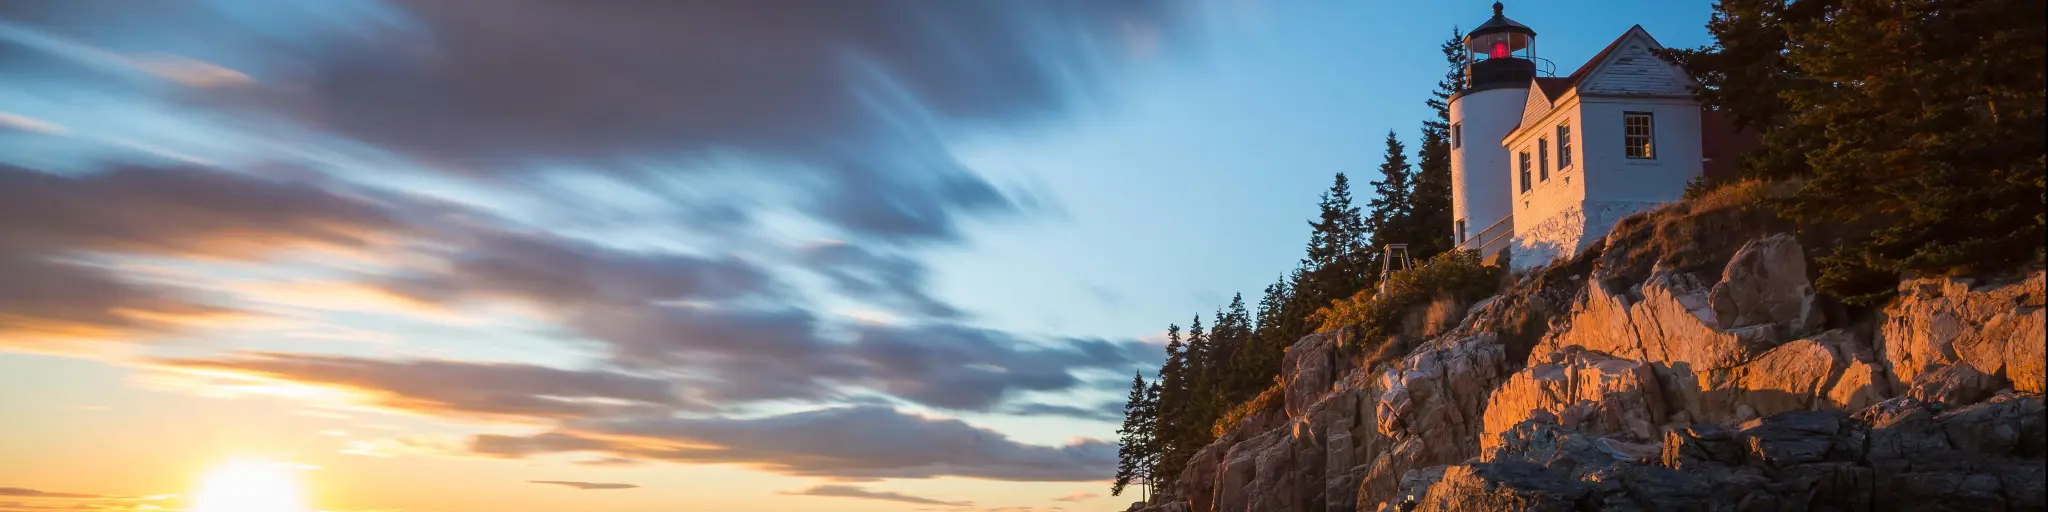 Acadia National Park, Maine, USA with a view of the Bass Harbor Lighthouse at sunset.